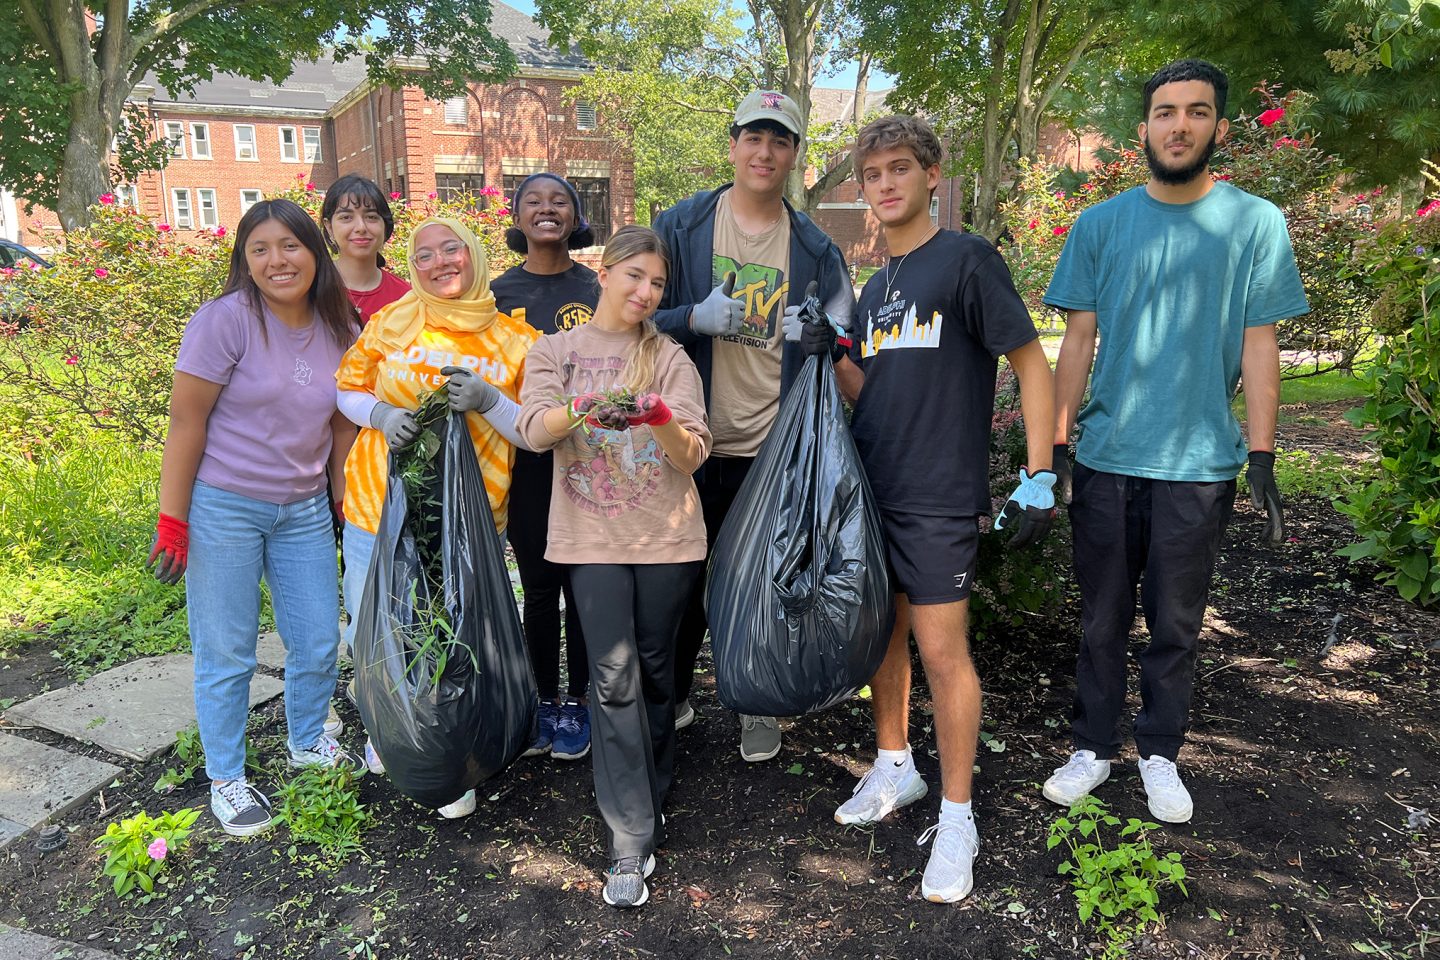 is our students volunteering at the Northport VA Medical Center, cleaning up the meditation garden for our veterans suffering from PTSD. This garden is an area they can go to connect with one another, talk about their experiences, and bring peace.